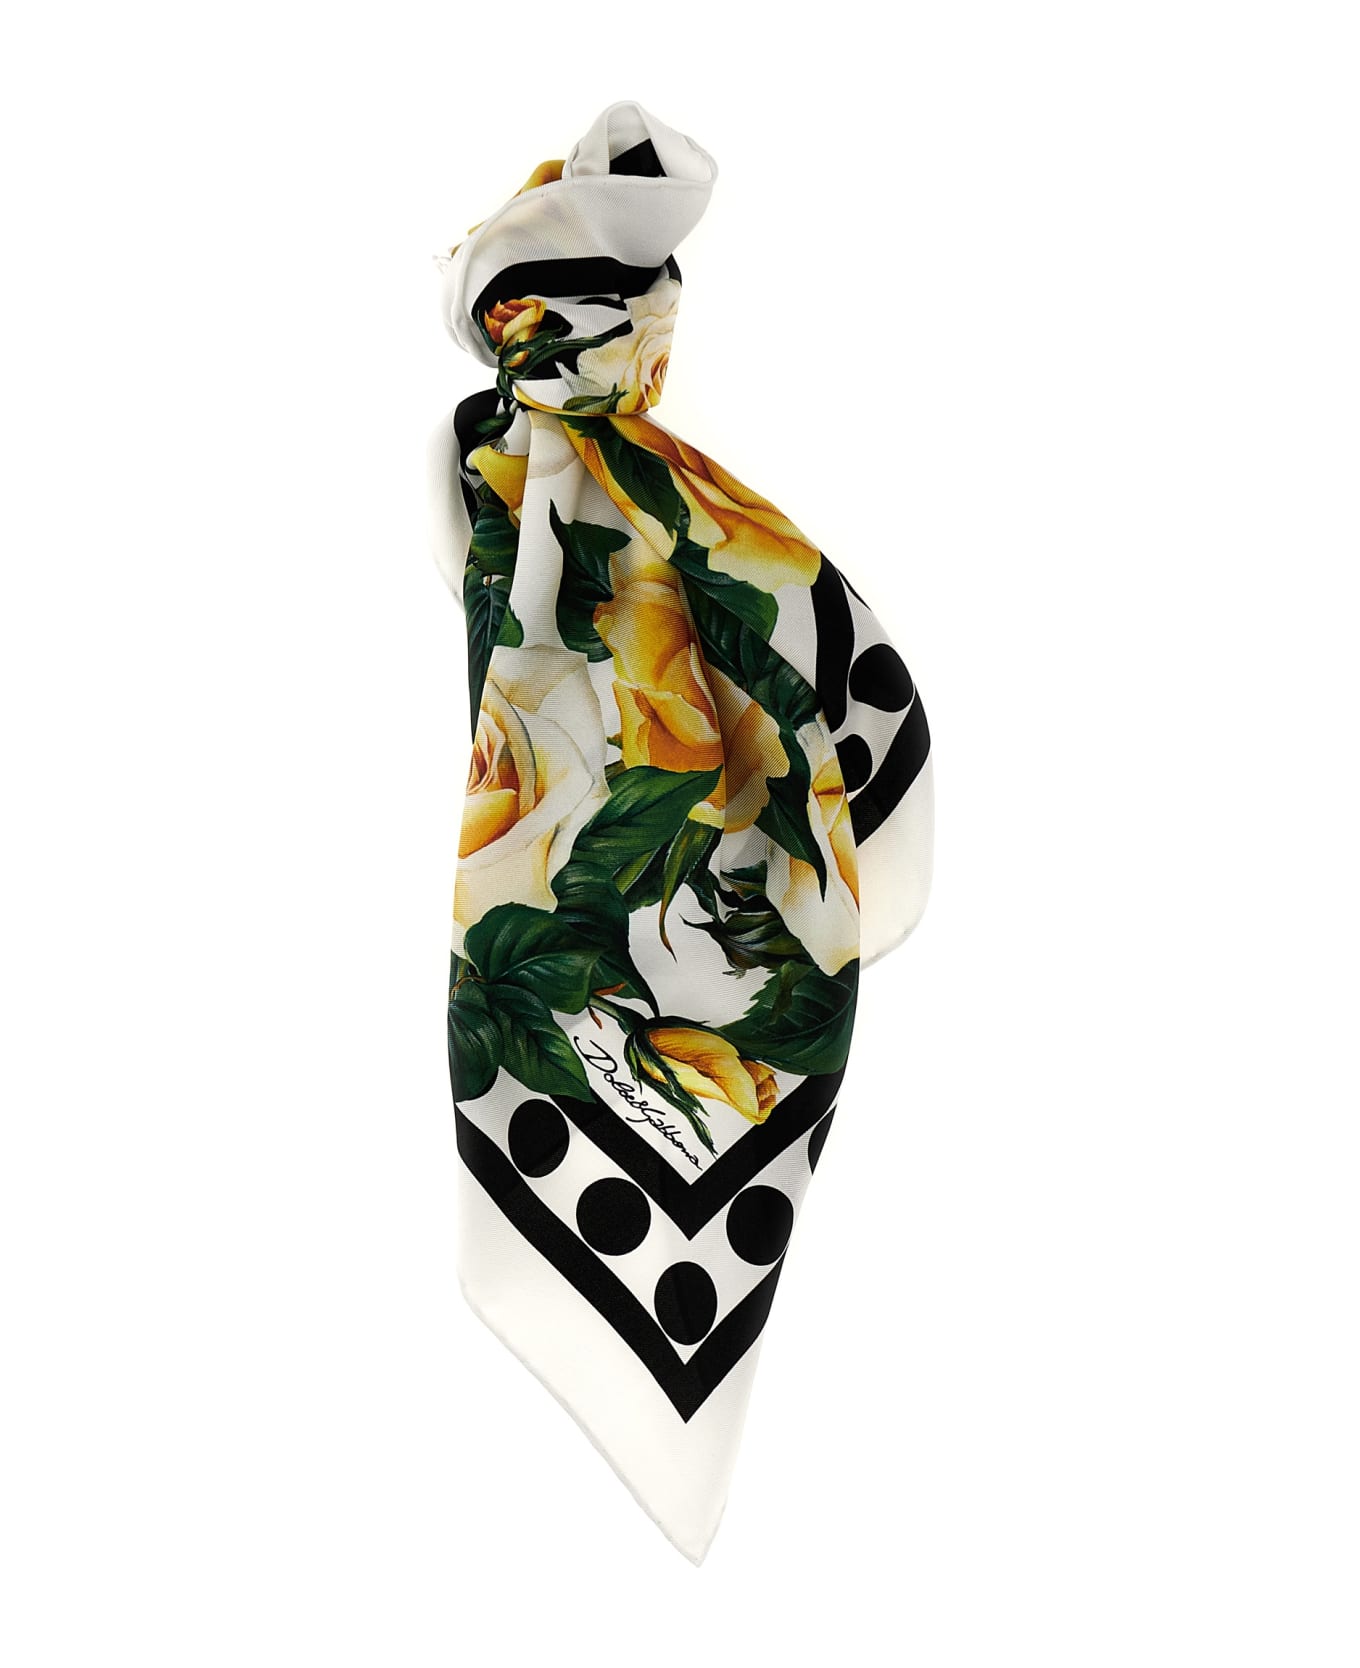 Dolce & Gabbana 'rose Gialle' Scarf - Multicolor